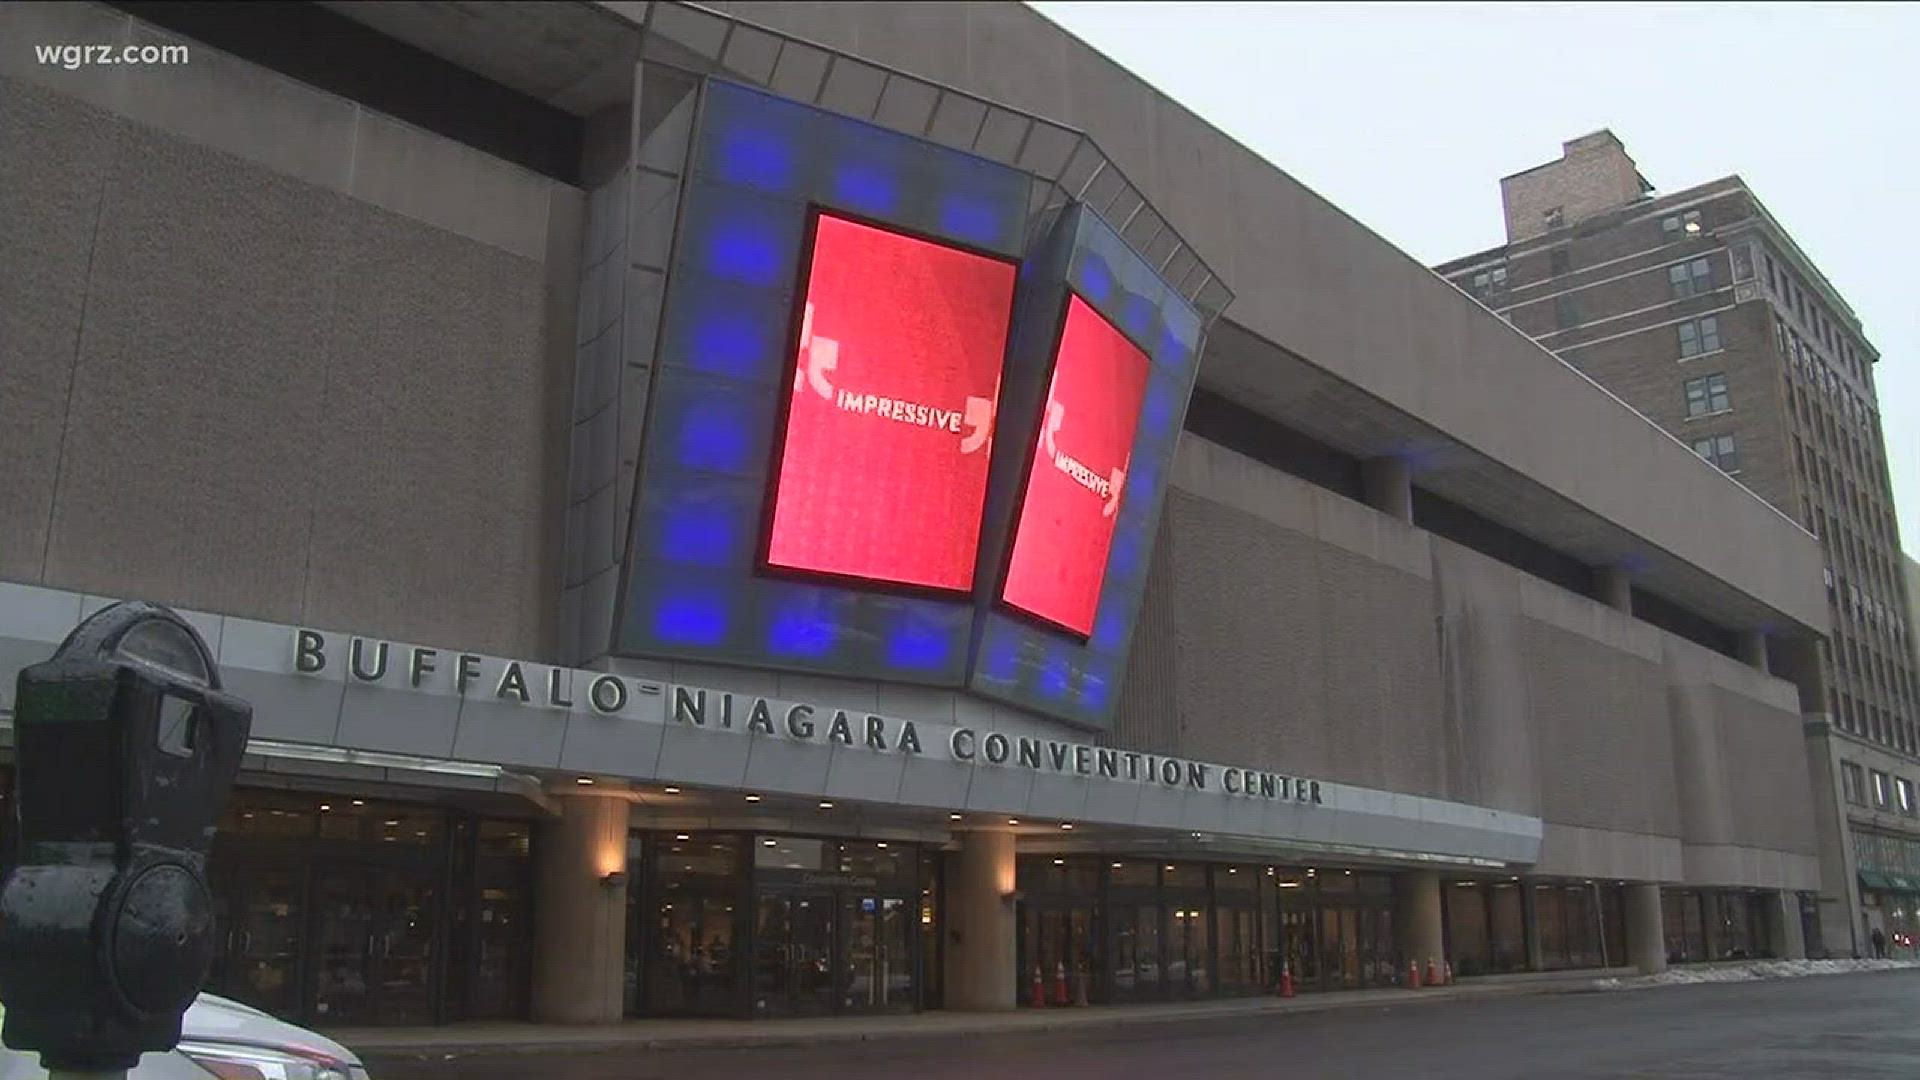 The Erie County Legislature could vote next week to allocate additional funding for the ongoing Buffalo Niagara Convention Center feasibility study.